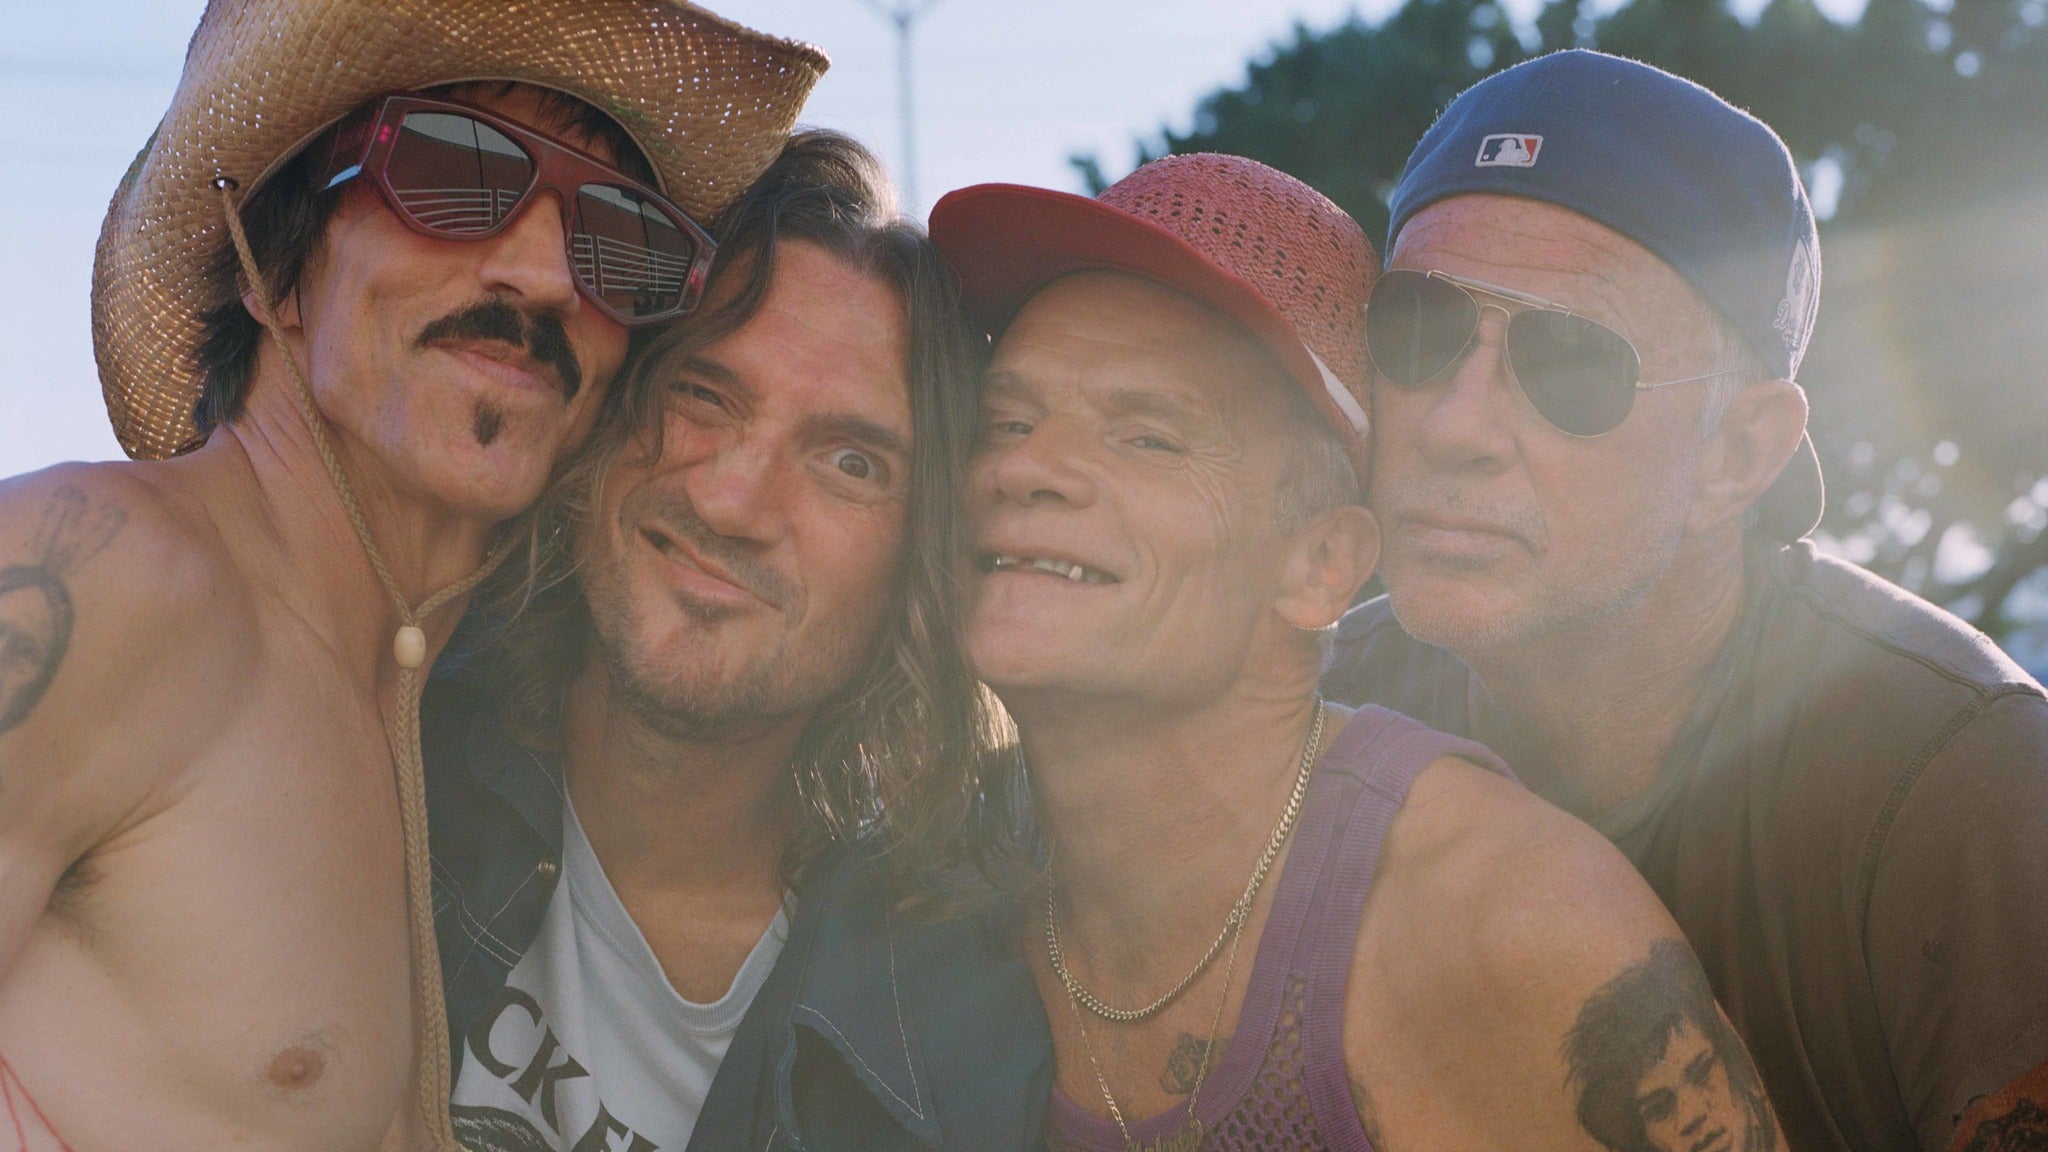 Red Hot Chili Peppers: World Tour 2022